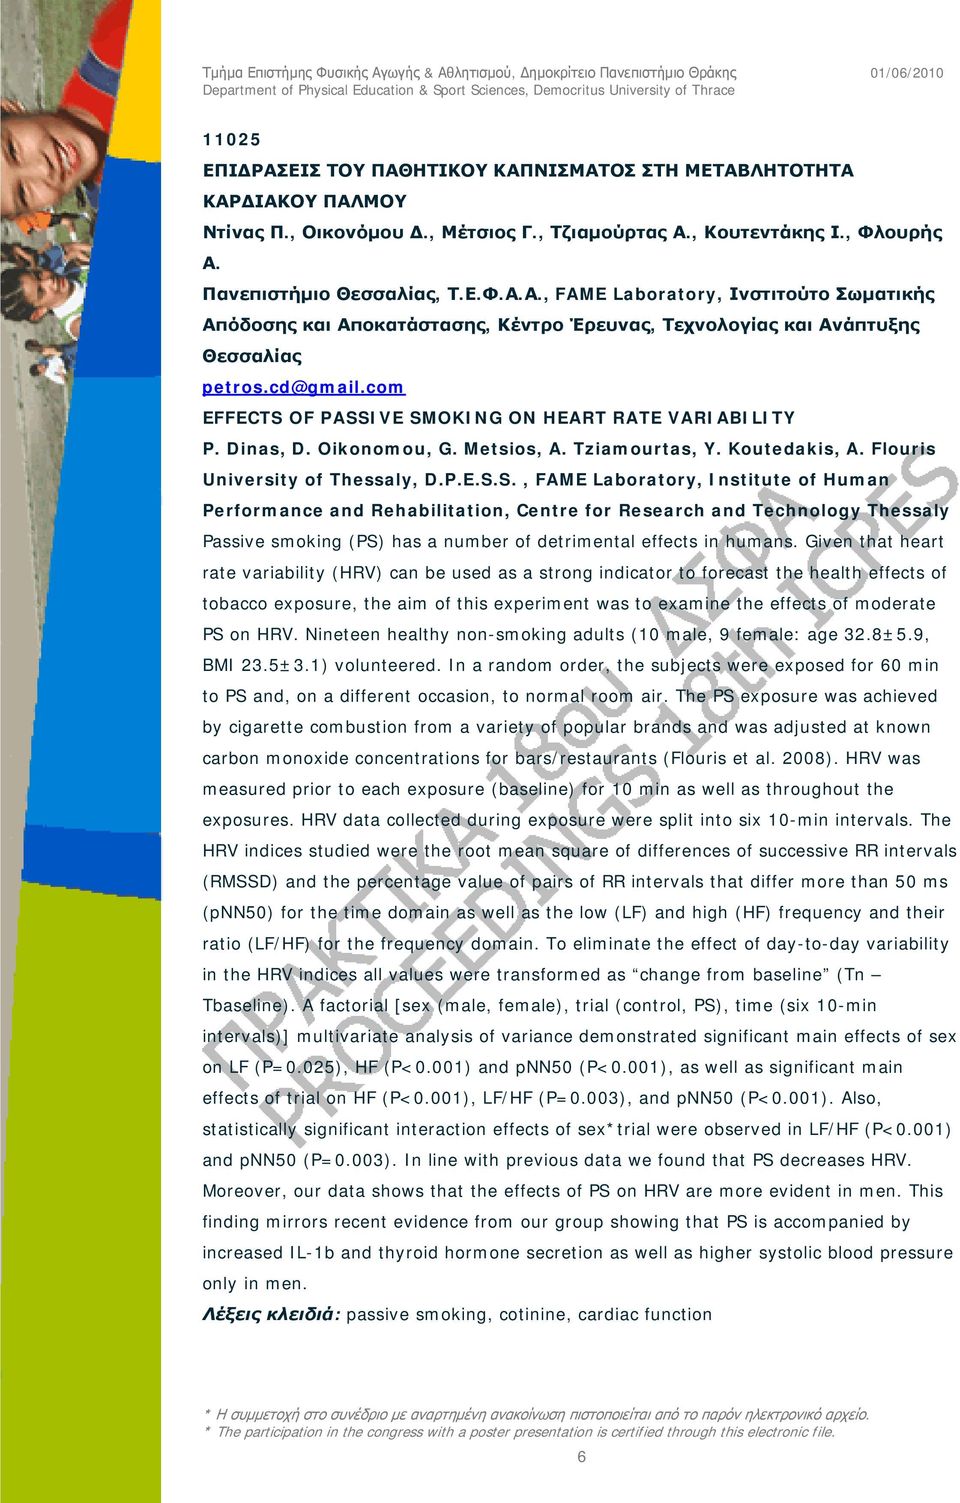 OF PASSIVE SMOKING ON HEART RATE VARIABILITY P. Dinas, D. Oikonomou, G. Metsios, A. Tziamourtas, Y. Koutedakis, A. Flouris University of Thessaly, D.P.E.S.S., FAME Laboratory, Institute of Human Performance and Rehabilitation, Centre for Research and Technology Thessaly Passive smoking (PS) has a number of detrimental effects in humans.